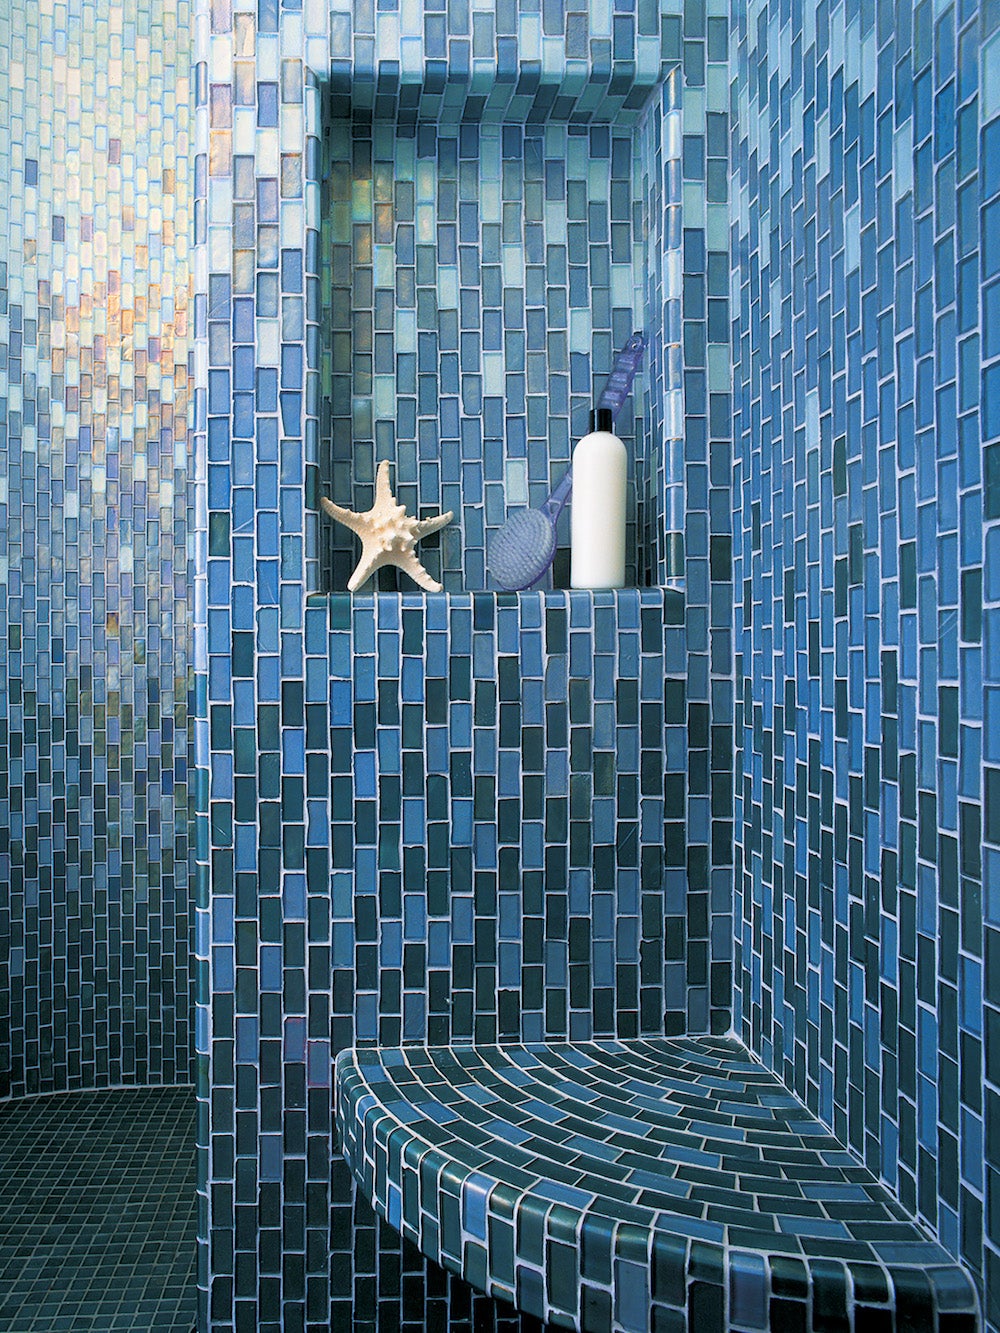 blue ombre tile bathroom with recessed wall nook for shampoo